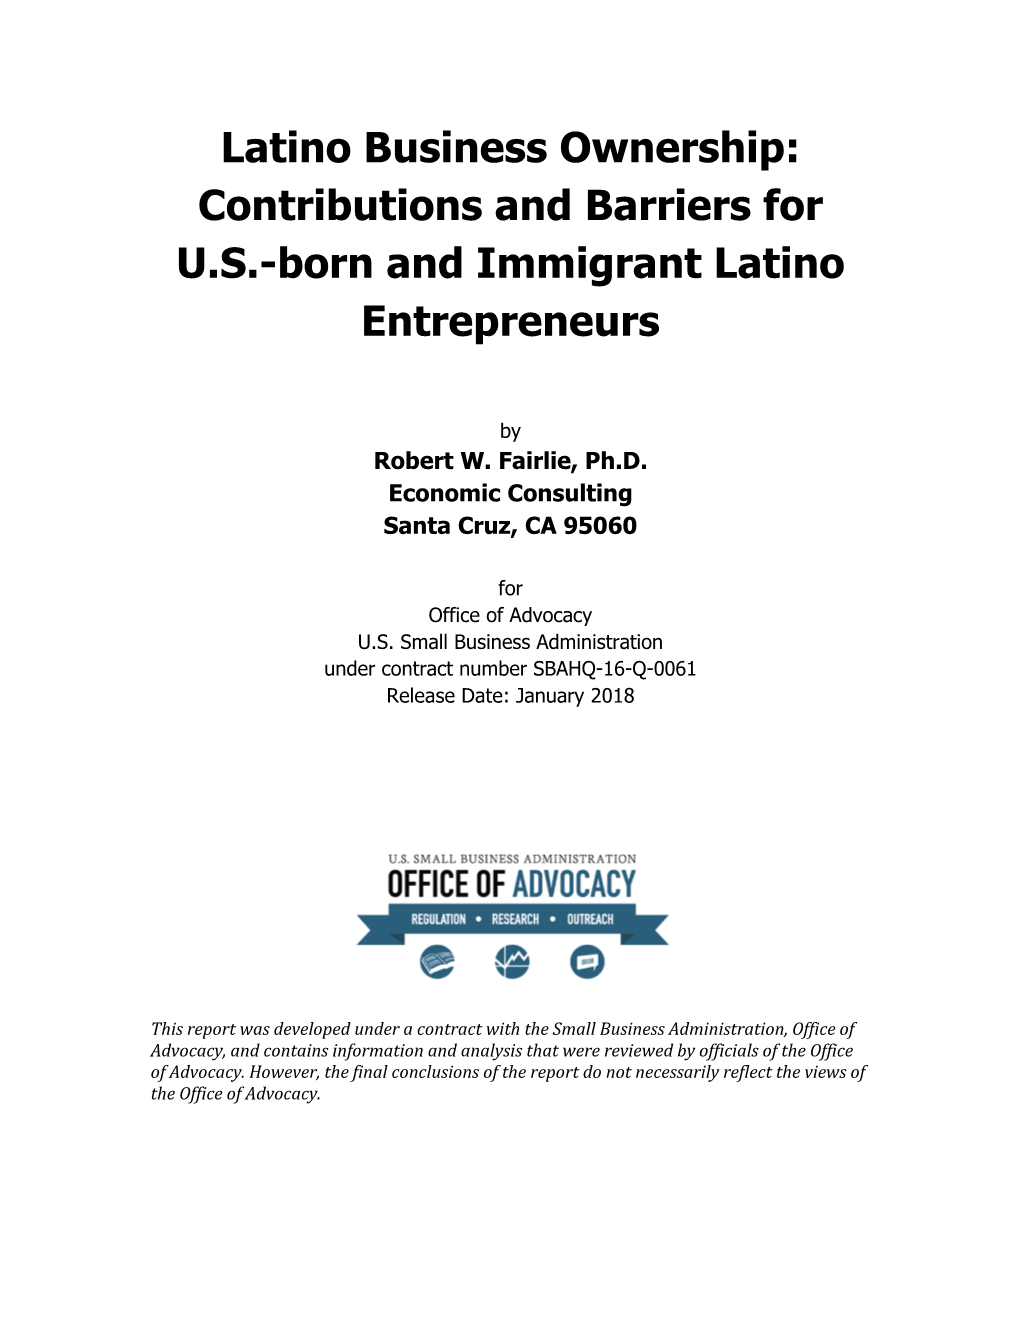 Contributions and Barriers for US-Born and Immigrant Latino